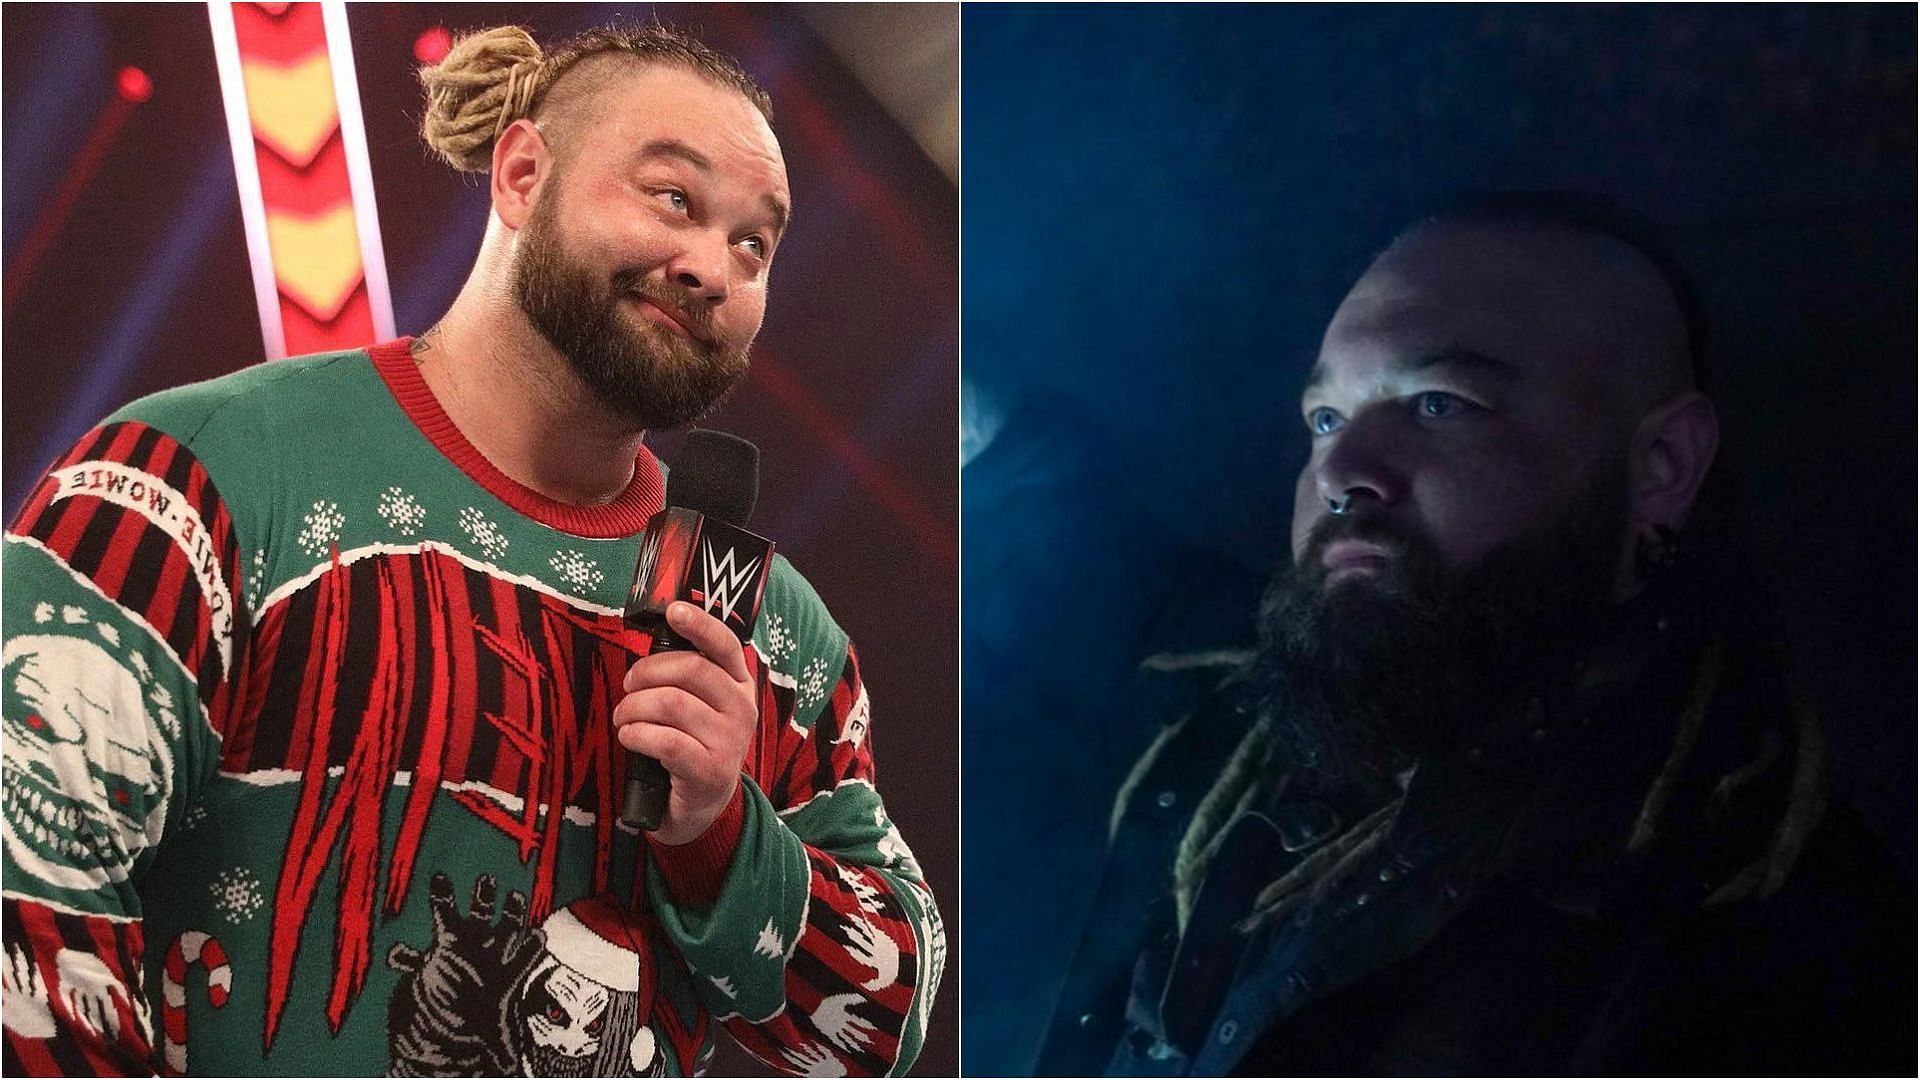 Bray Wyatt returned to WWE after more than a year away